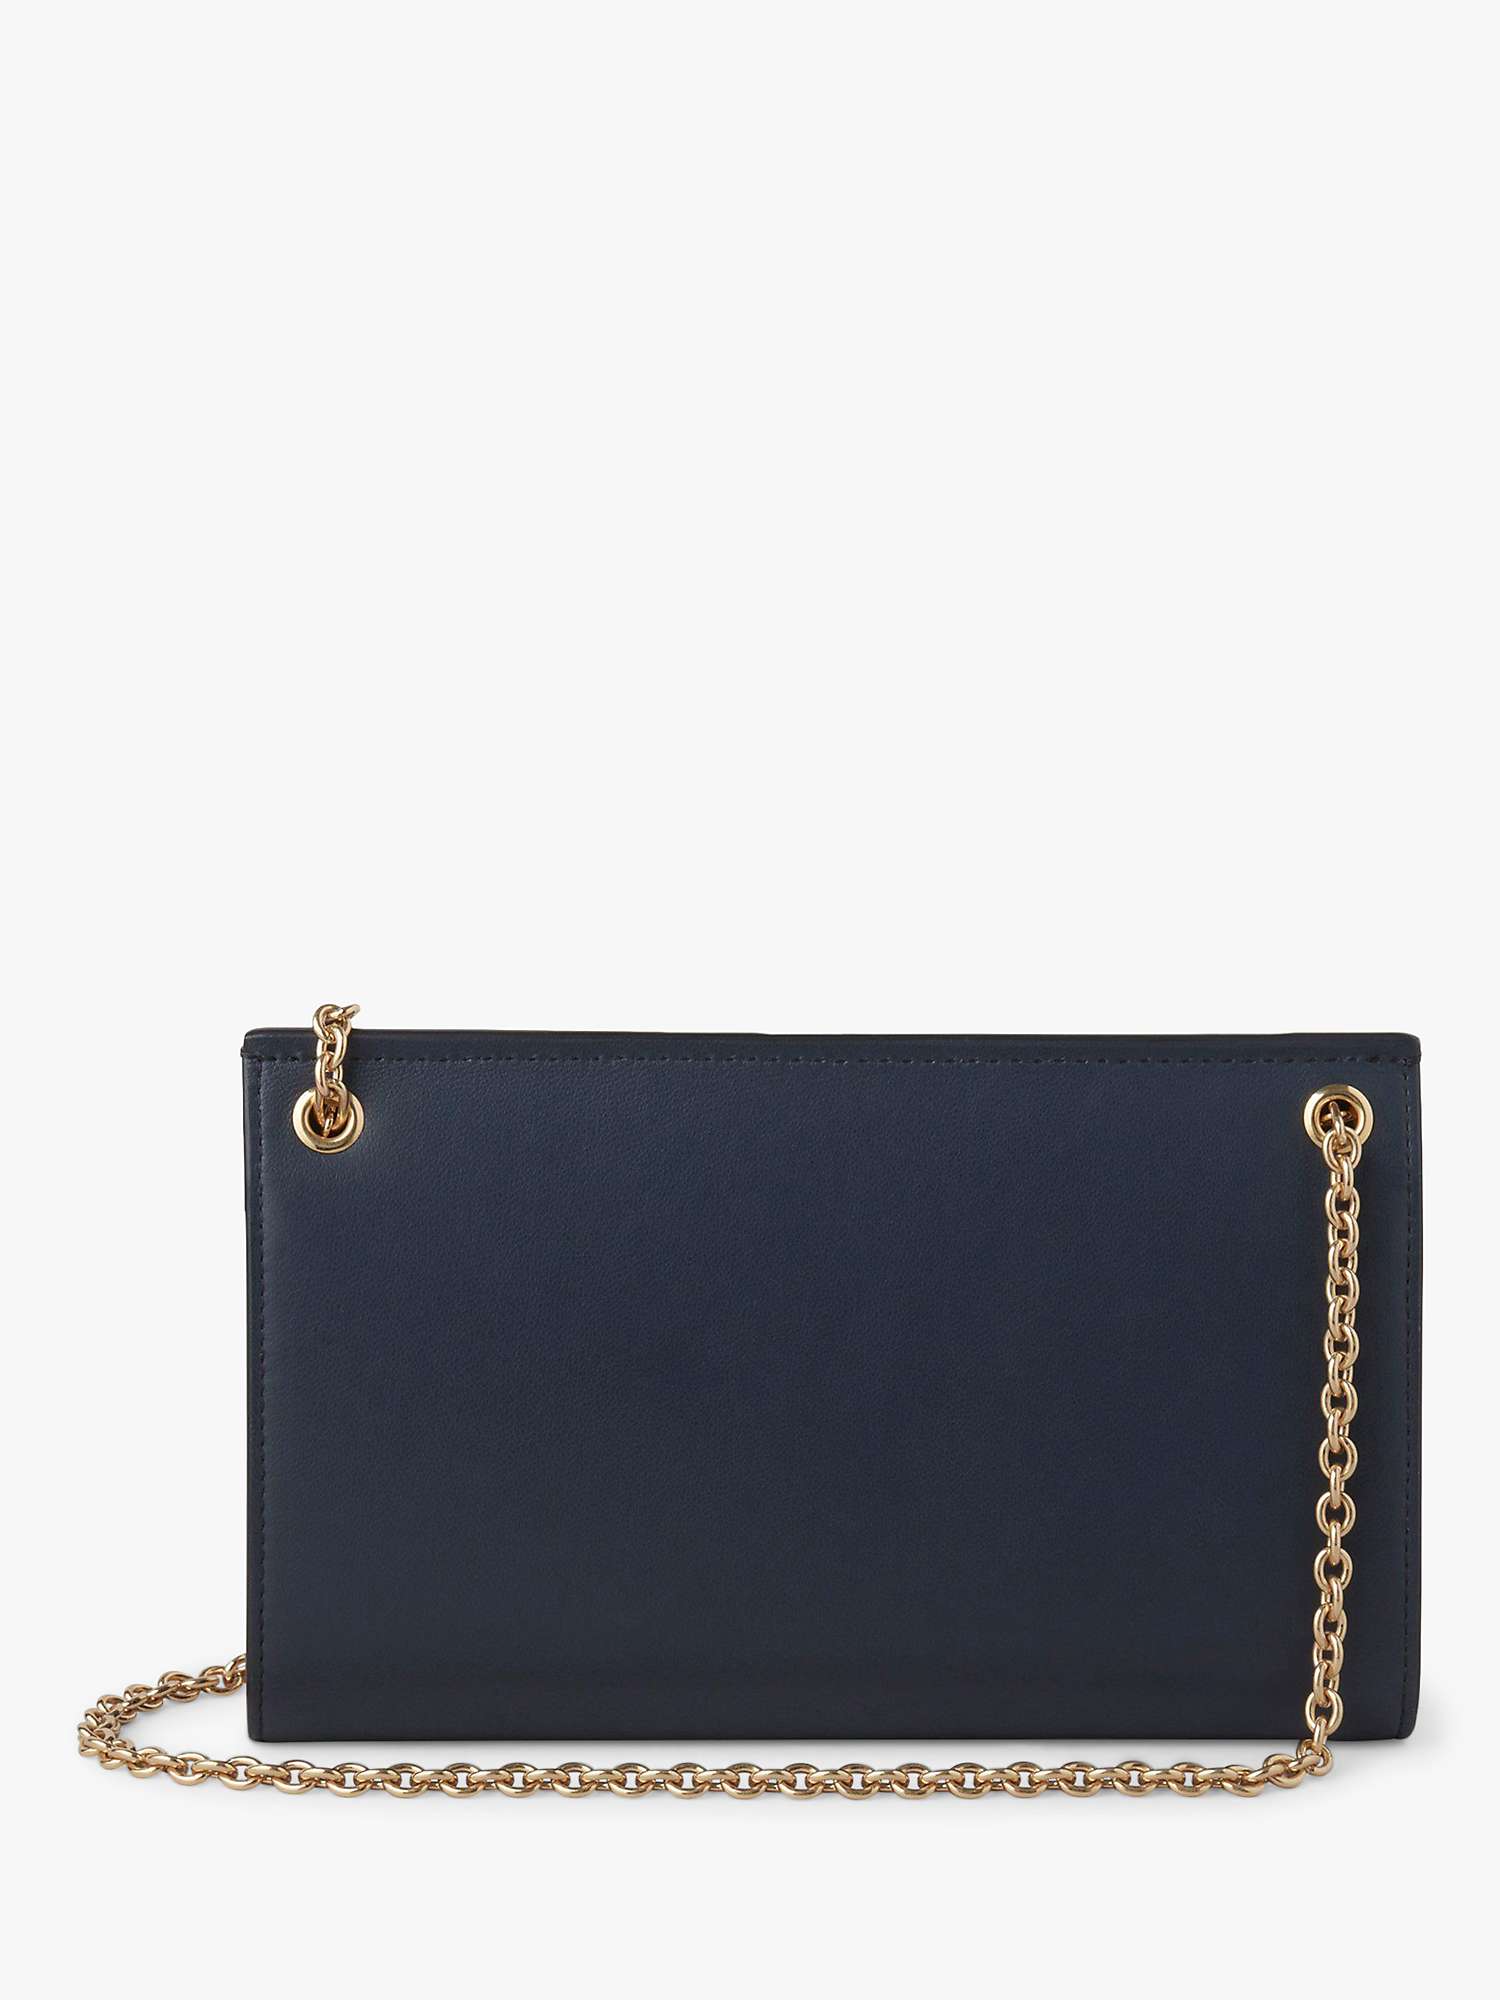 Buy Mulberry Amberley Micro Classic Grain Leather Clutch Bag Online at johnlewis.com